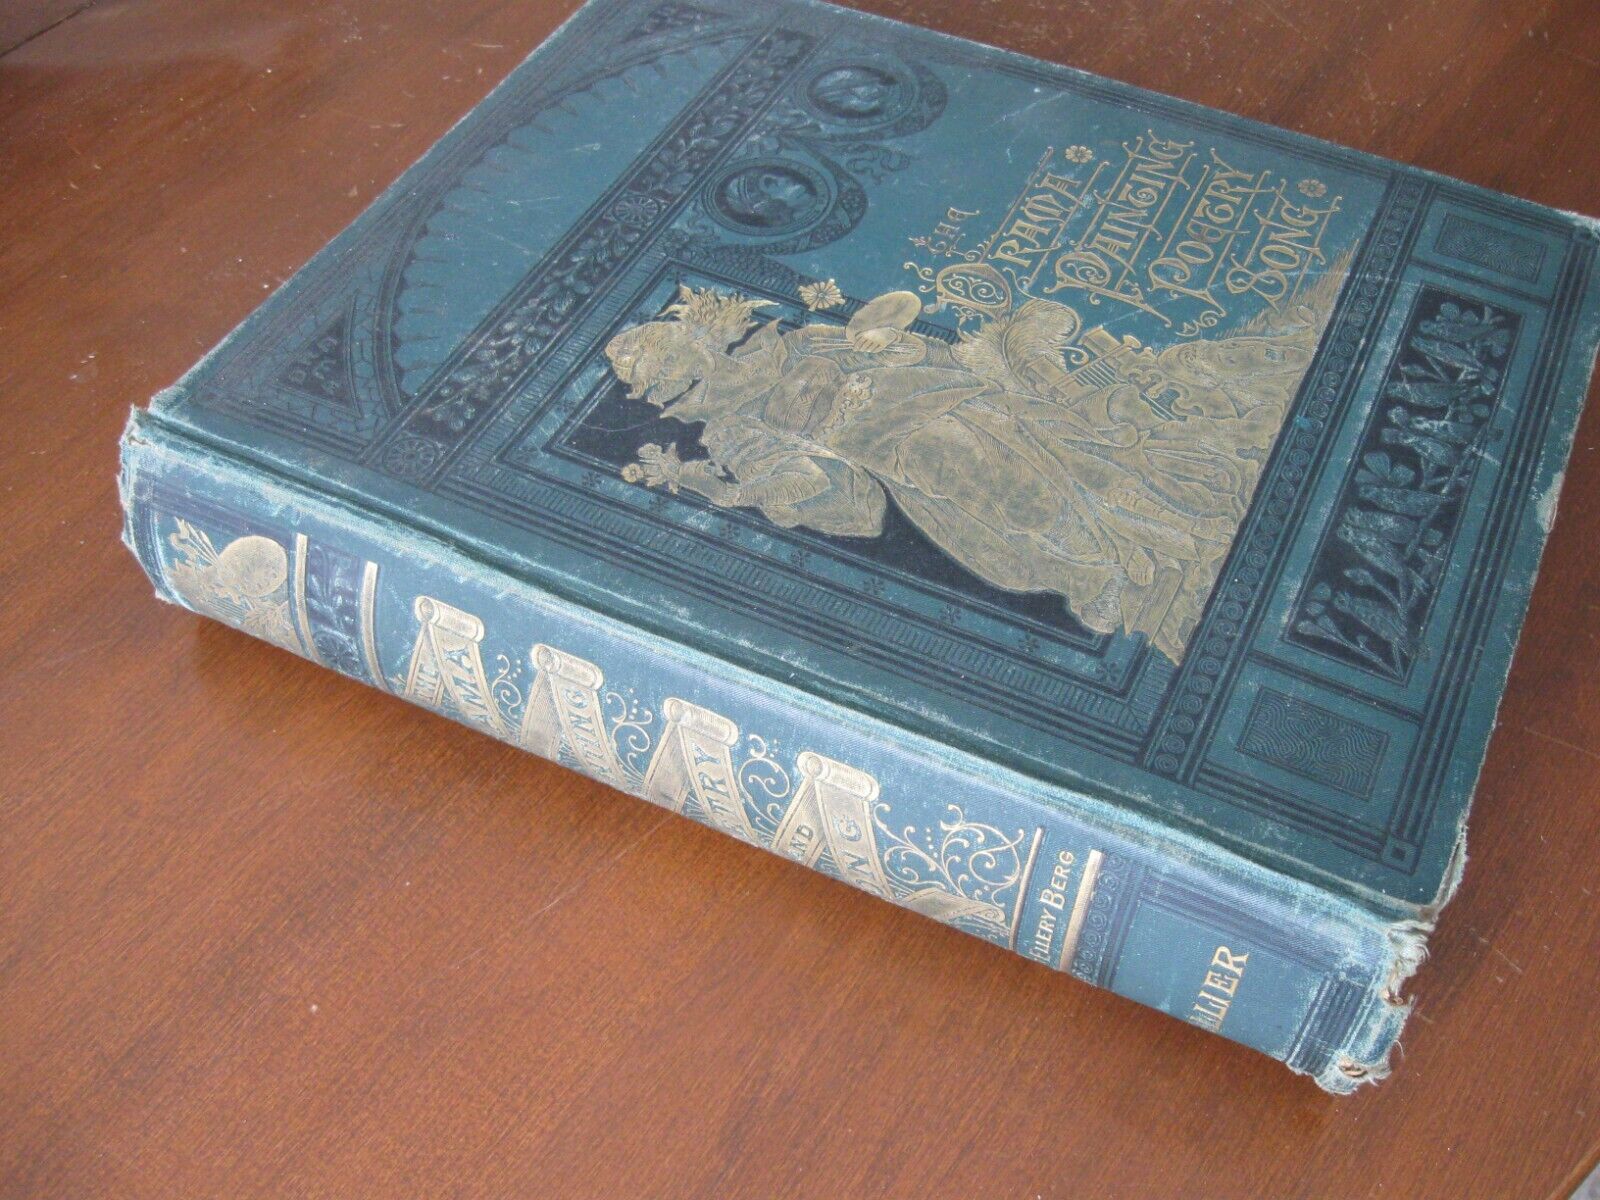 1884 Book - The DRAMA PAINTING POETRY SONG Stage by ALBERT ELLERY BERG Collier